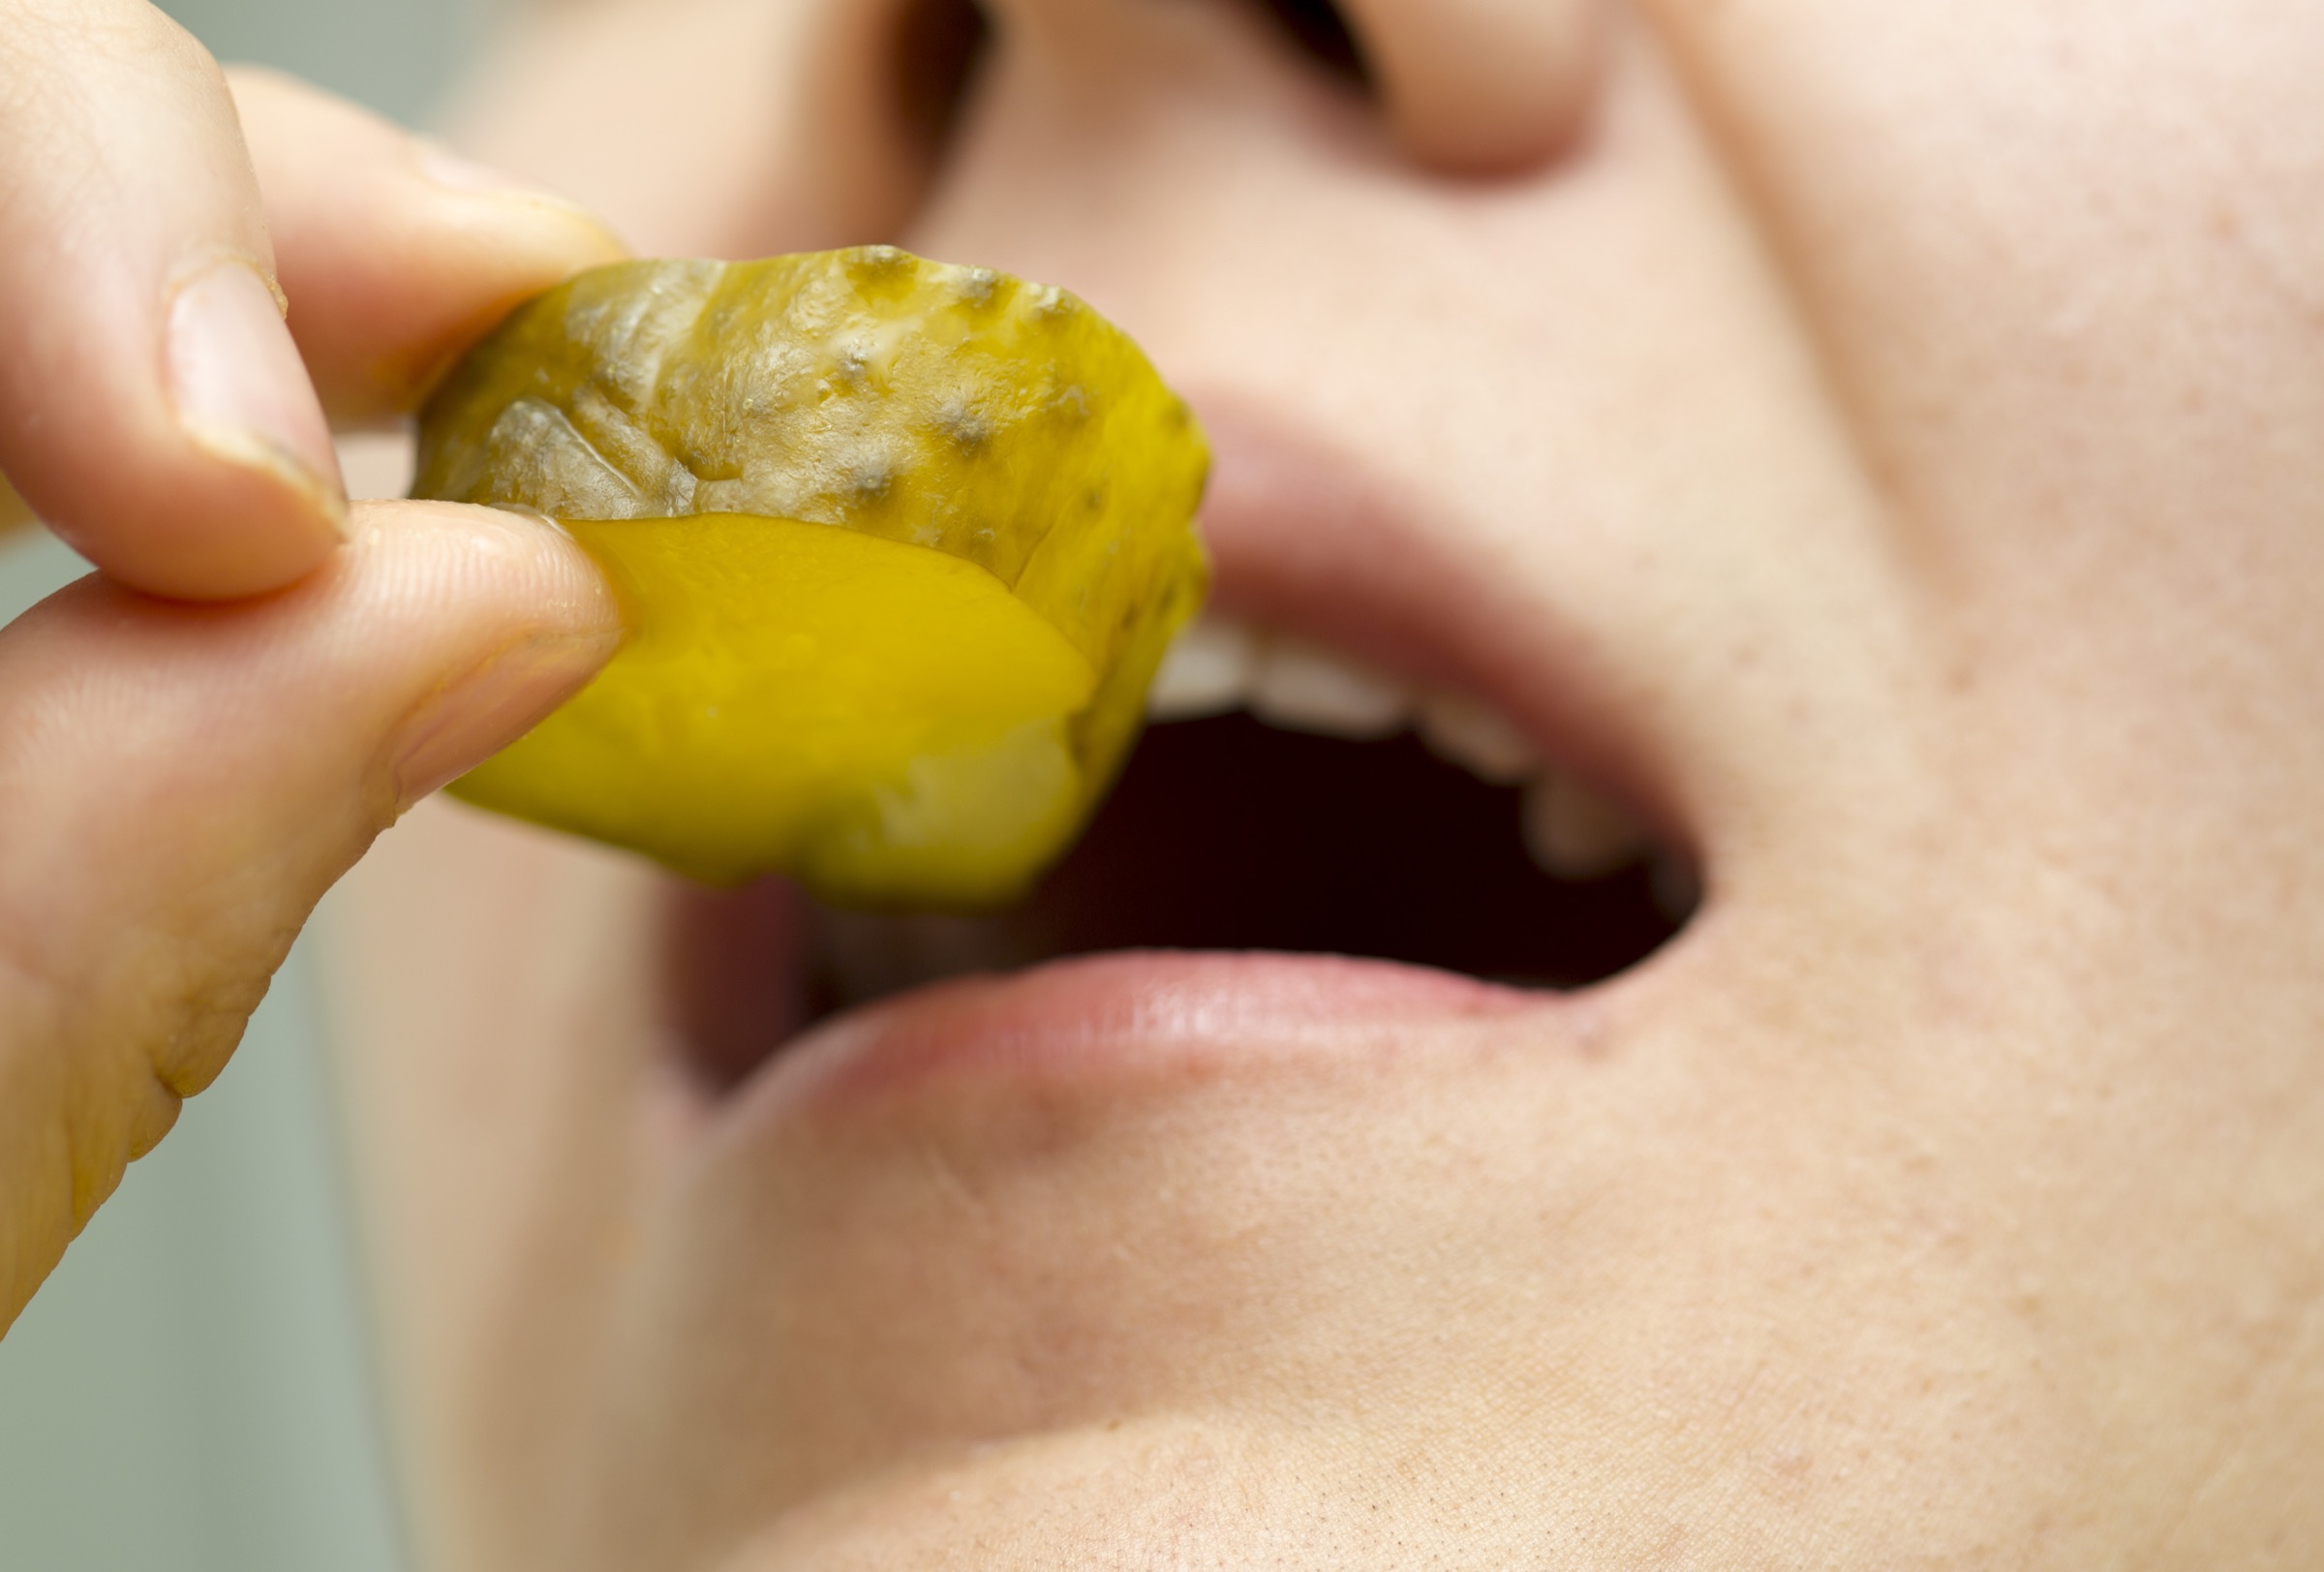 A close-up view of a man eating a bright green-yellow pickle slice.